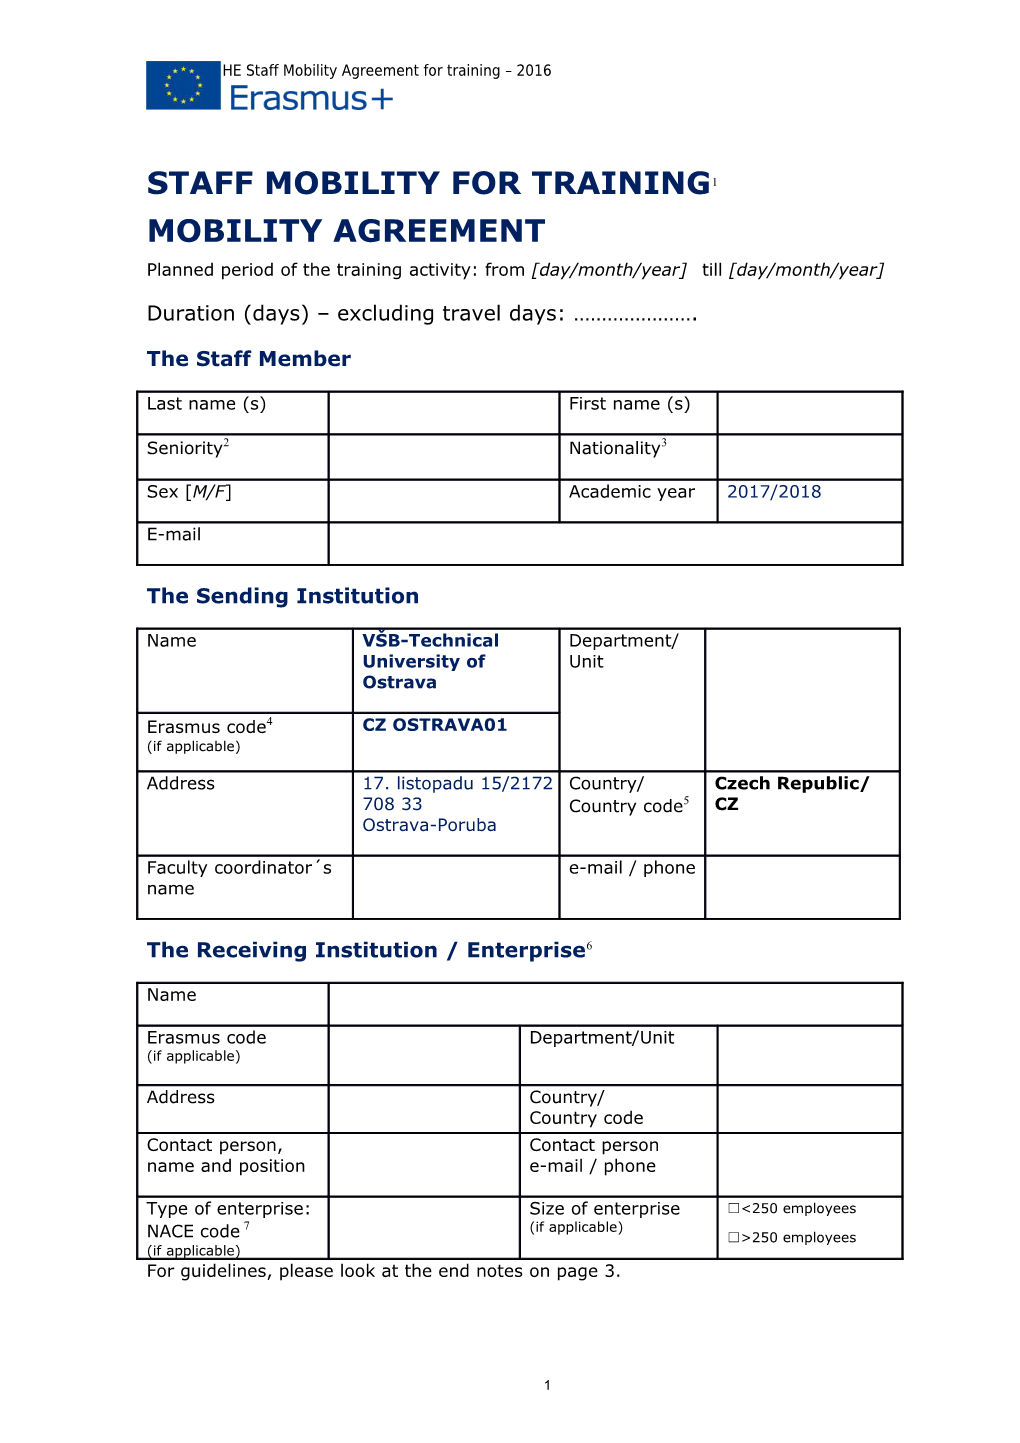 Erasmus+ HE Staff Mobility Agreement for Training 2016